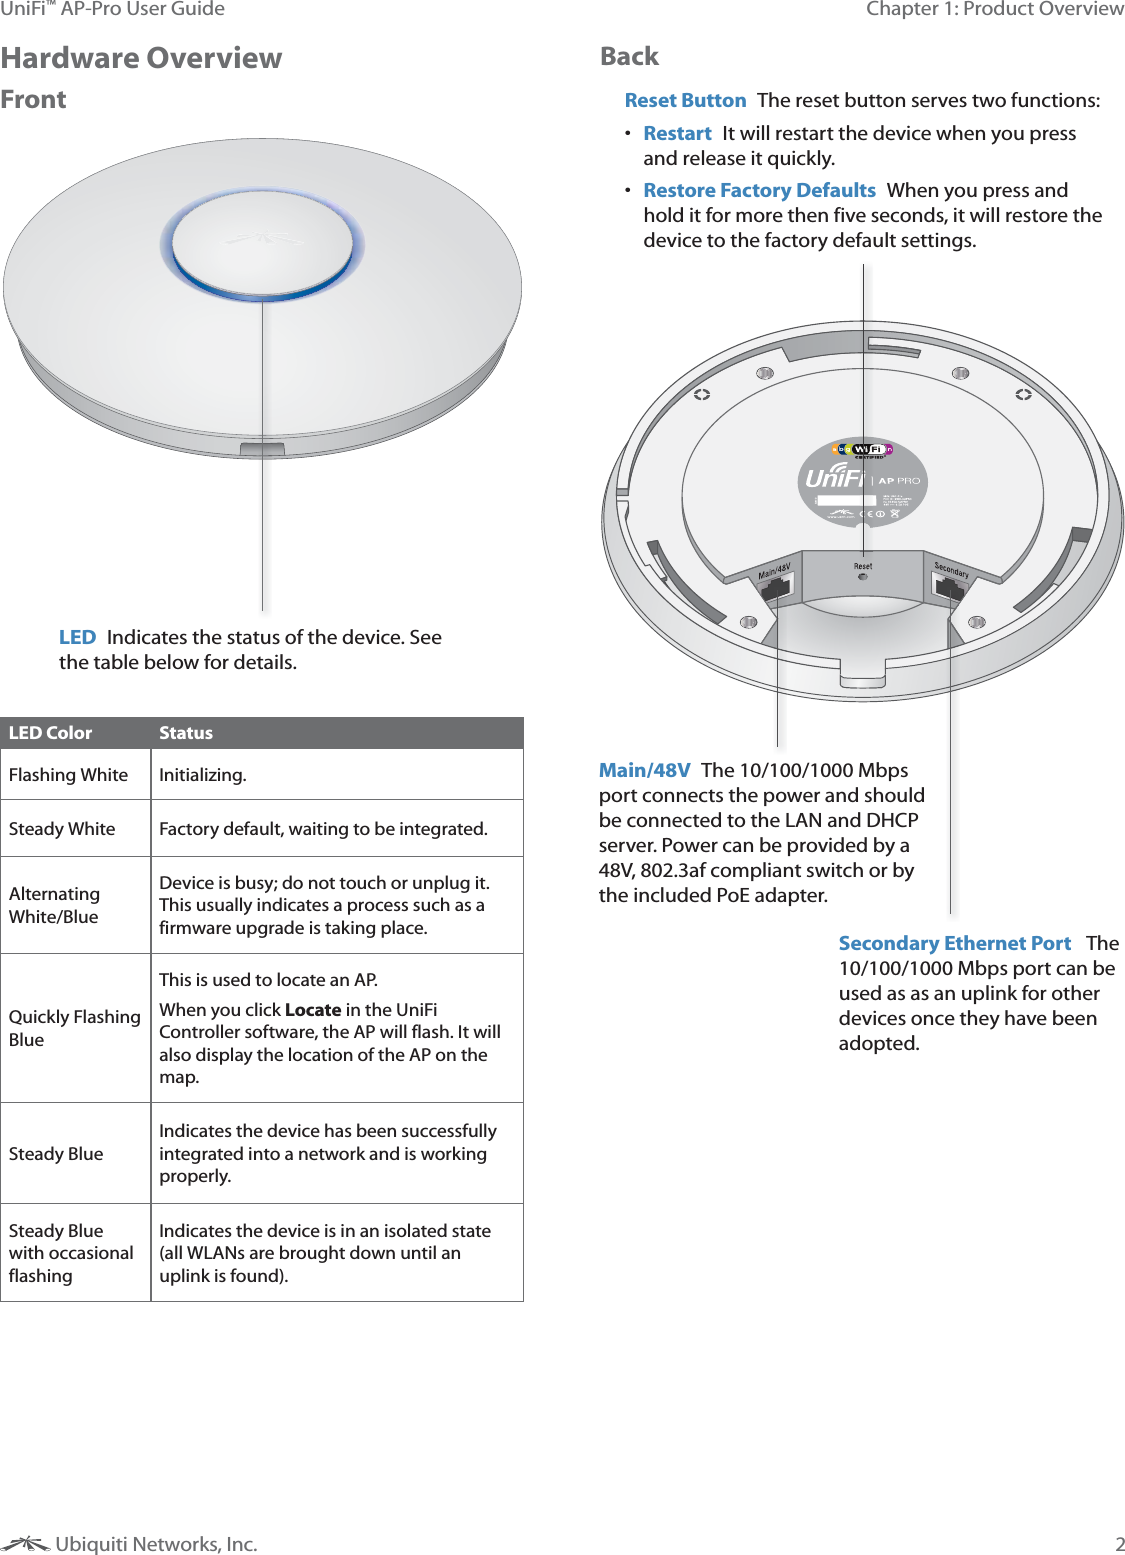 2Chapter 1: Product OverviewUniFi™ AP-Pro User Guide Ubiquiti Networks, Inc.Hardware OverviewFrontLED  Indicates the status of the device. See the table below for details.LED Color StatusFlashing White Initializing.Steady White Factory default, waiting to be integrated.Alternating White/BlueDevice is busy; do not touch or unplug it. This usually indicates a process such as a firmware upgrade is taking place.Quickly Flashing BlueThis is used to locate an AP. When you click Locate in the UniFi Controller software, the AP will flash. It will also display the location of the AP on the map.Steady BlueIndicates the device has been successfully integrated into a network and is working properly.Steady Blue with occasional flashingIndicates the device is in an isolated state (all WLANs are brought down until an uplink is found).BackMain/48V  The 10/100/1000 Mbps port connects the power and should be connected to the LAN and DHCP server. Power can be provided by a 48V, 802.3af compliant switch or by the included PoE adapter.Reset Button  The reset button serves two functions:  Restart  It will restart the device when you press and release it quickly.  Restore Factory Defaults  When you press and hold it for more then five seconds, it will restore the device to the factory default settings.Secondary Ethernet Port   The 10/100/1000 Mbps port can be used as as an uplink for other devices once they have been adopted.